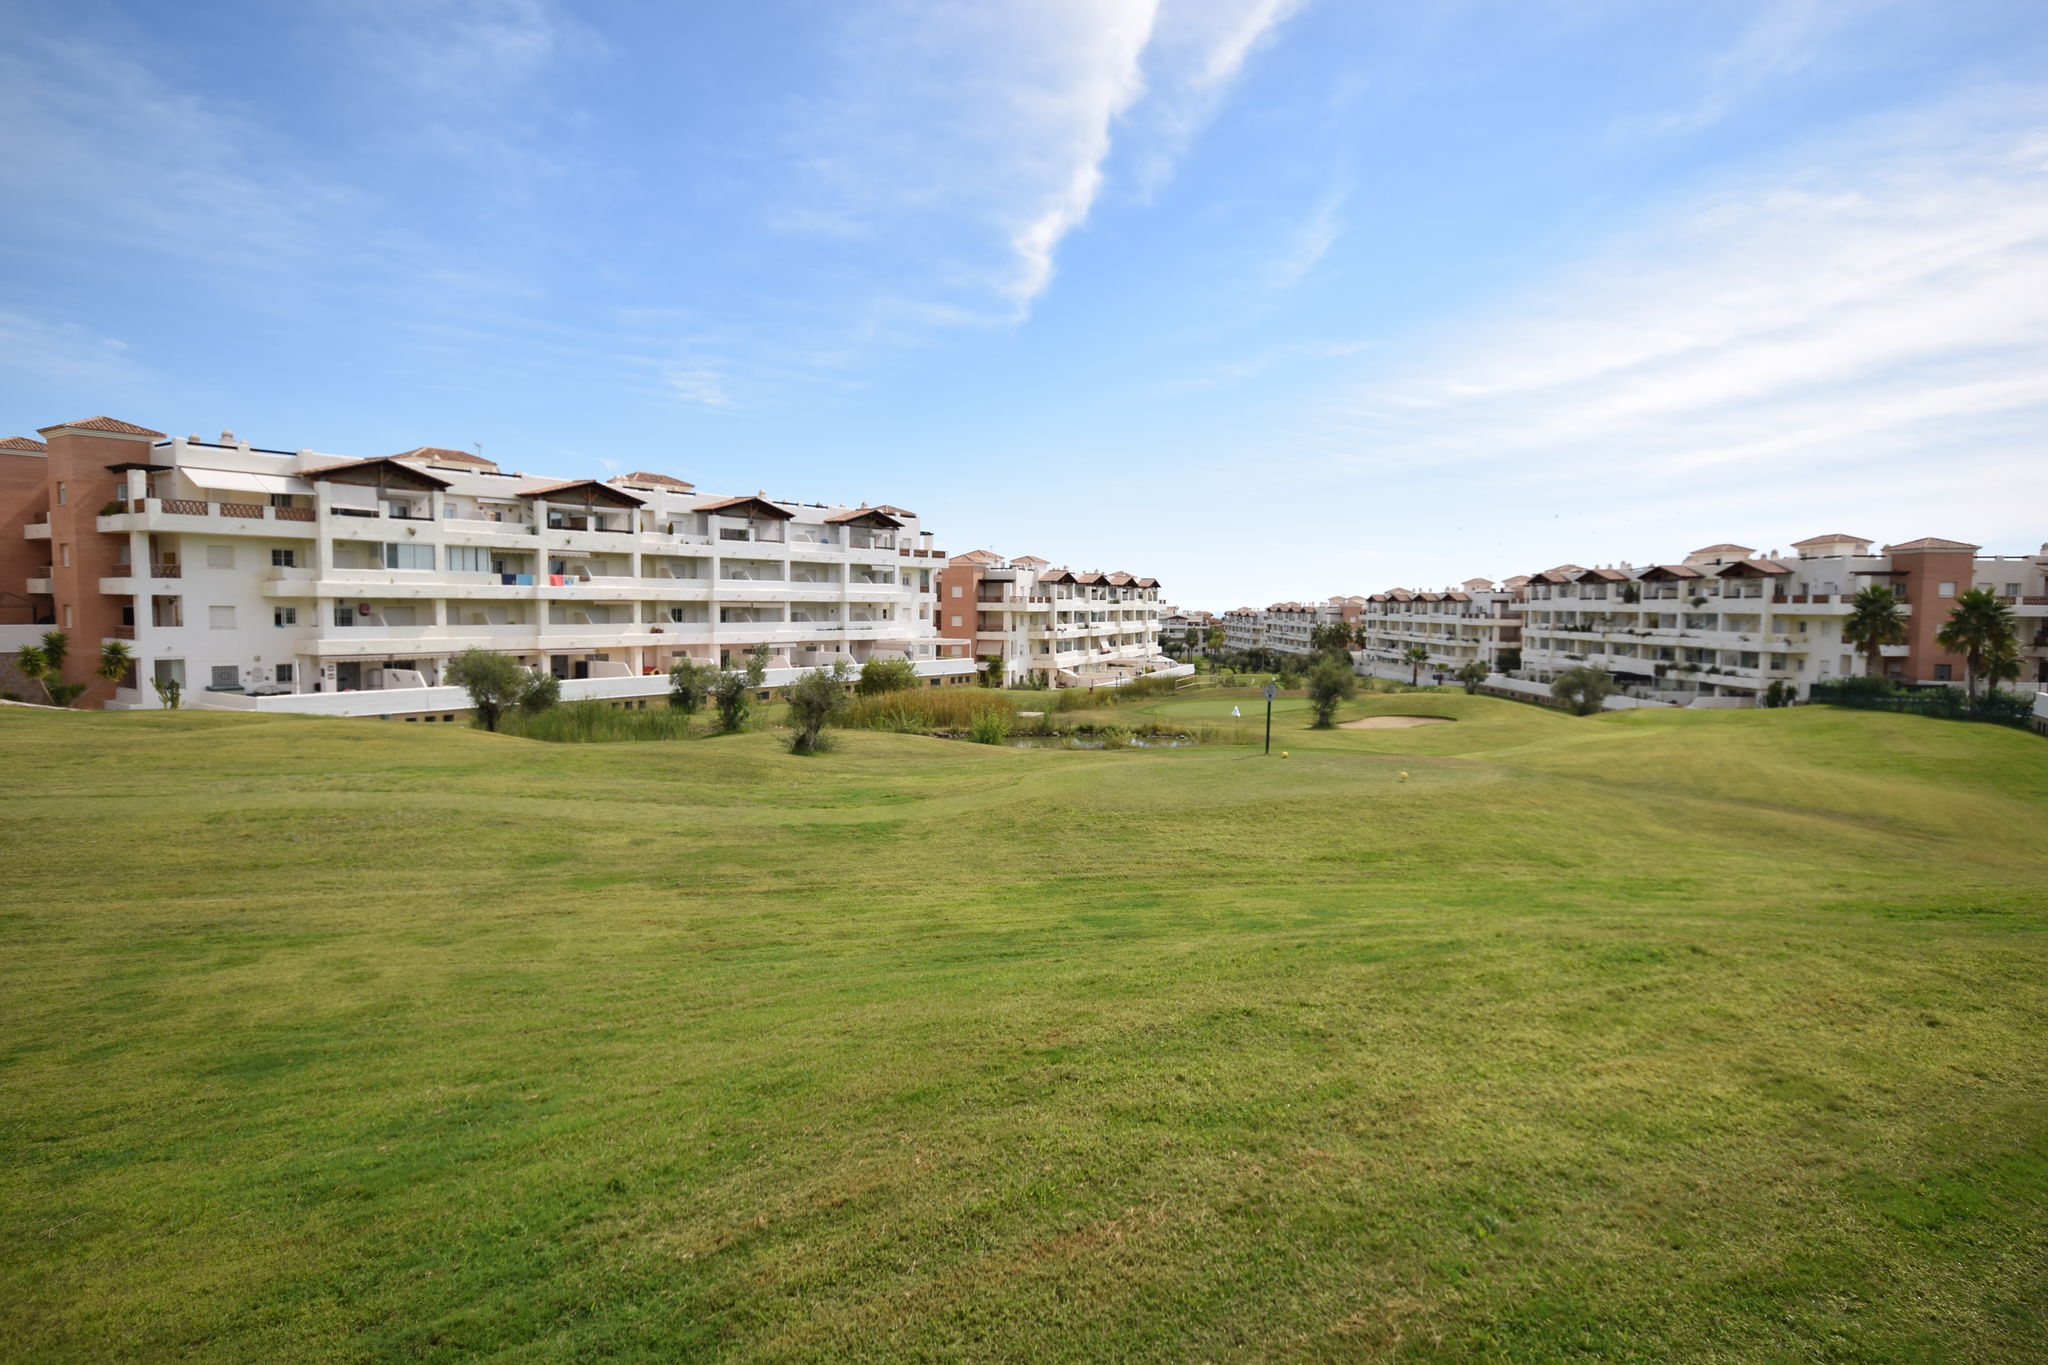 Comfortable apartment on the golf course, near the beach and activities